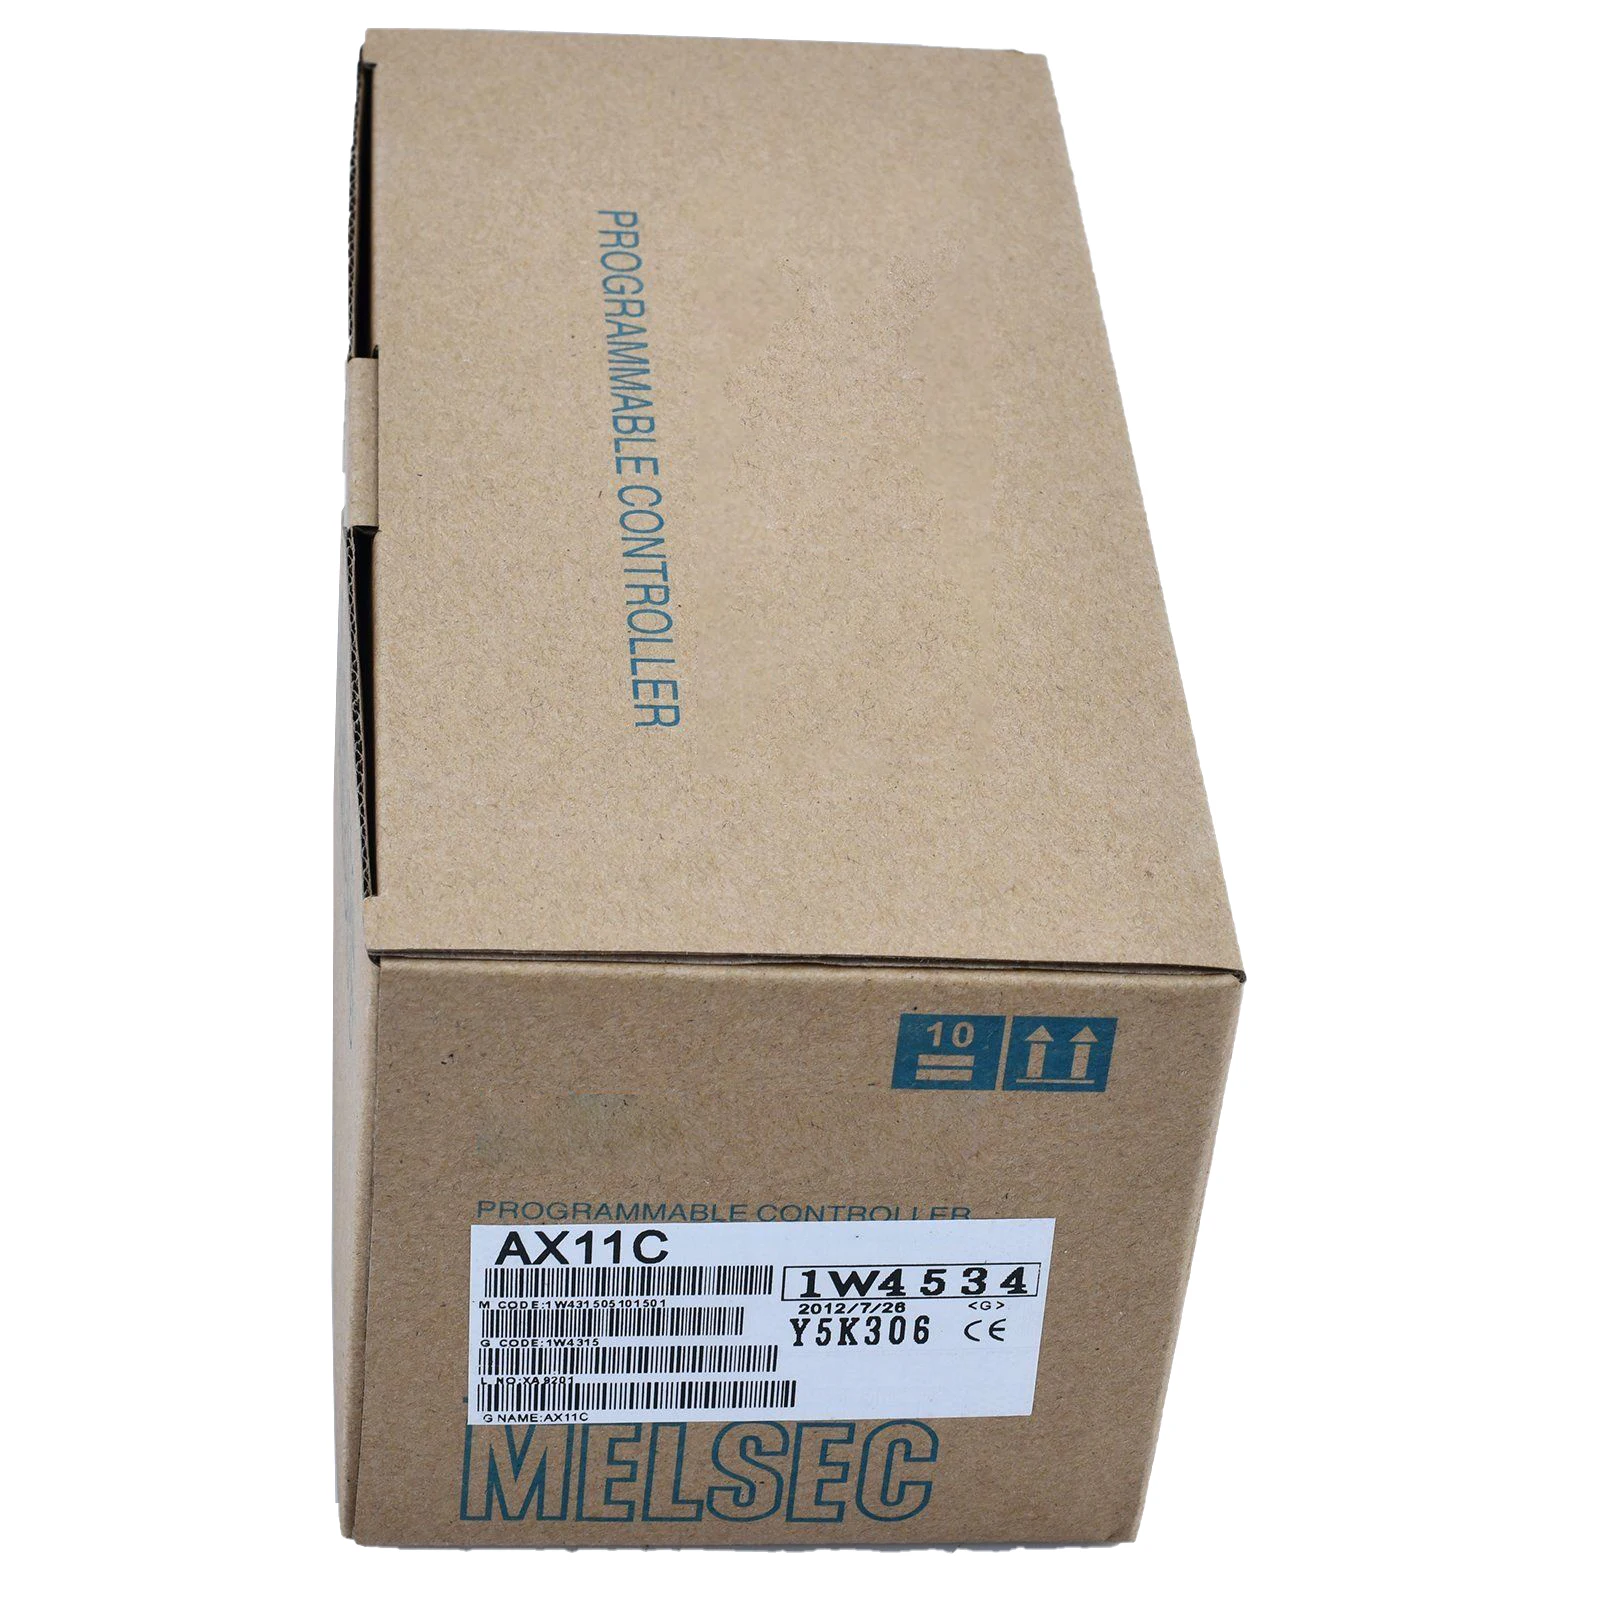 

New Original In BOX AX11C {Warehouse stock} 1 Year Warranty Shipment within 24 hours